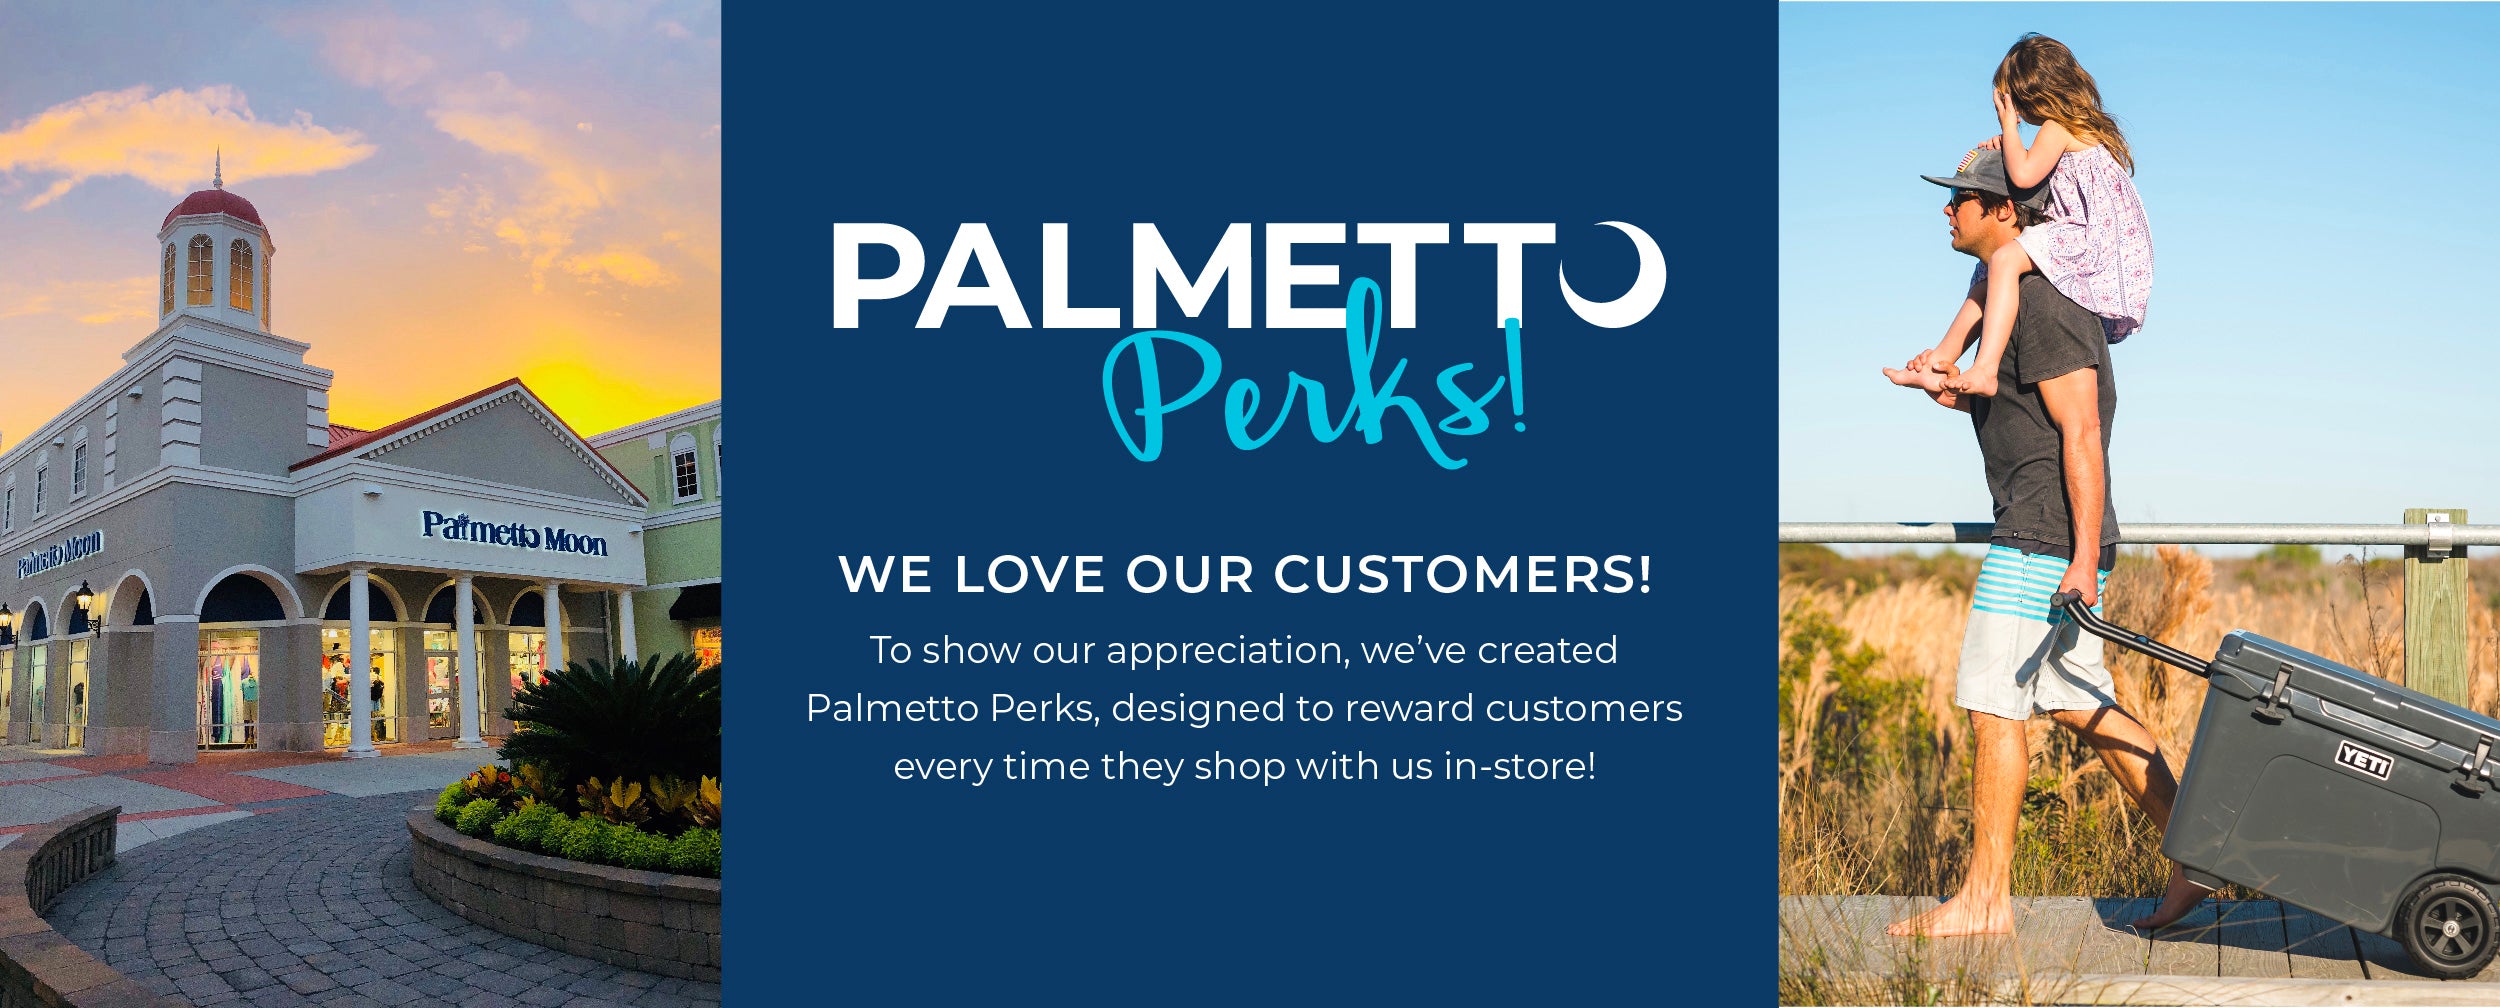 palmetto perks - we love our customers! store image and dad and daughter carrying a yeti cooler image